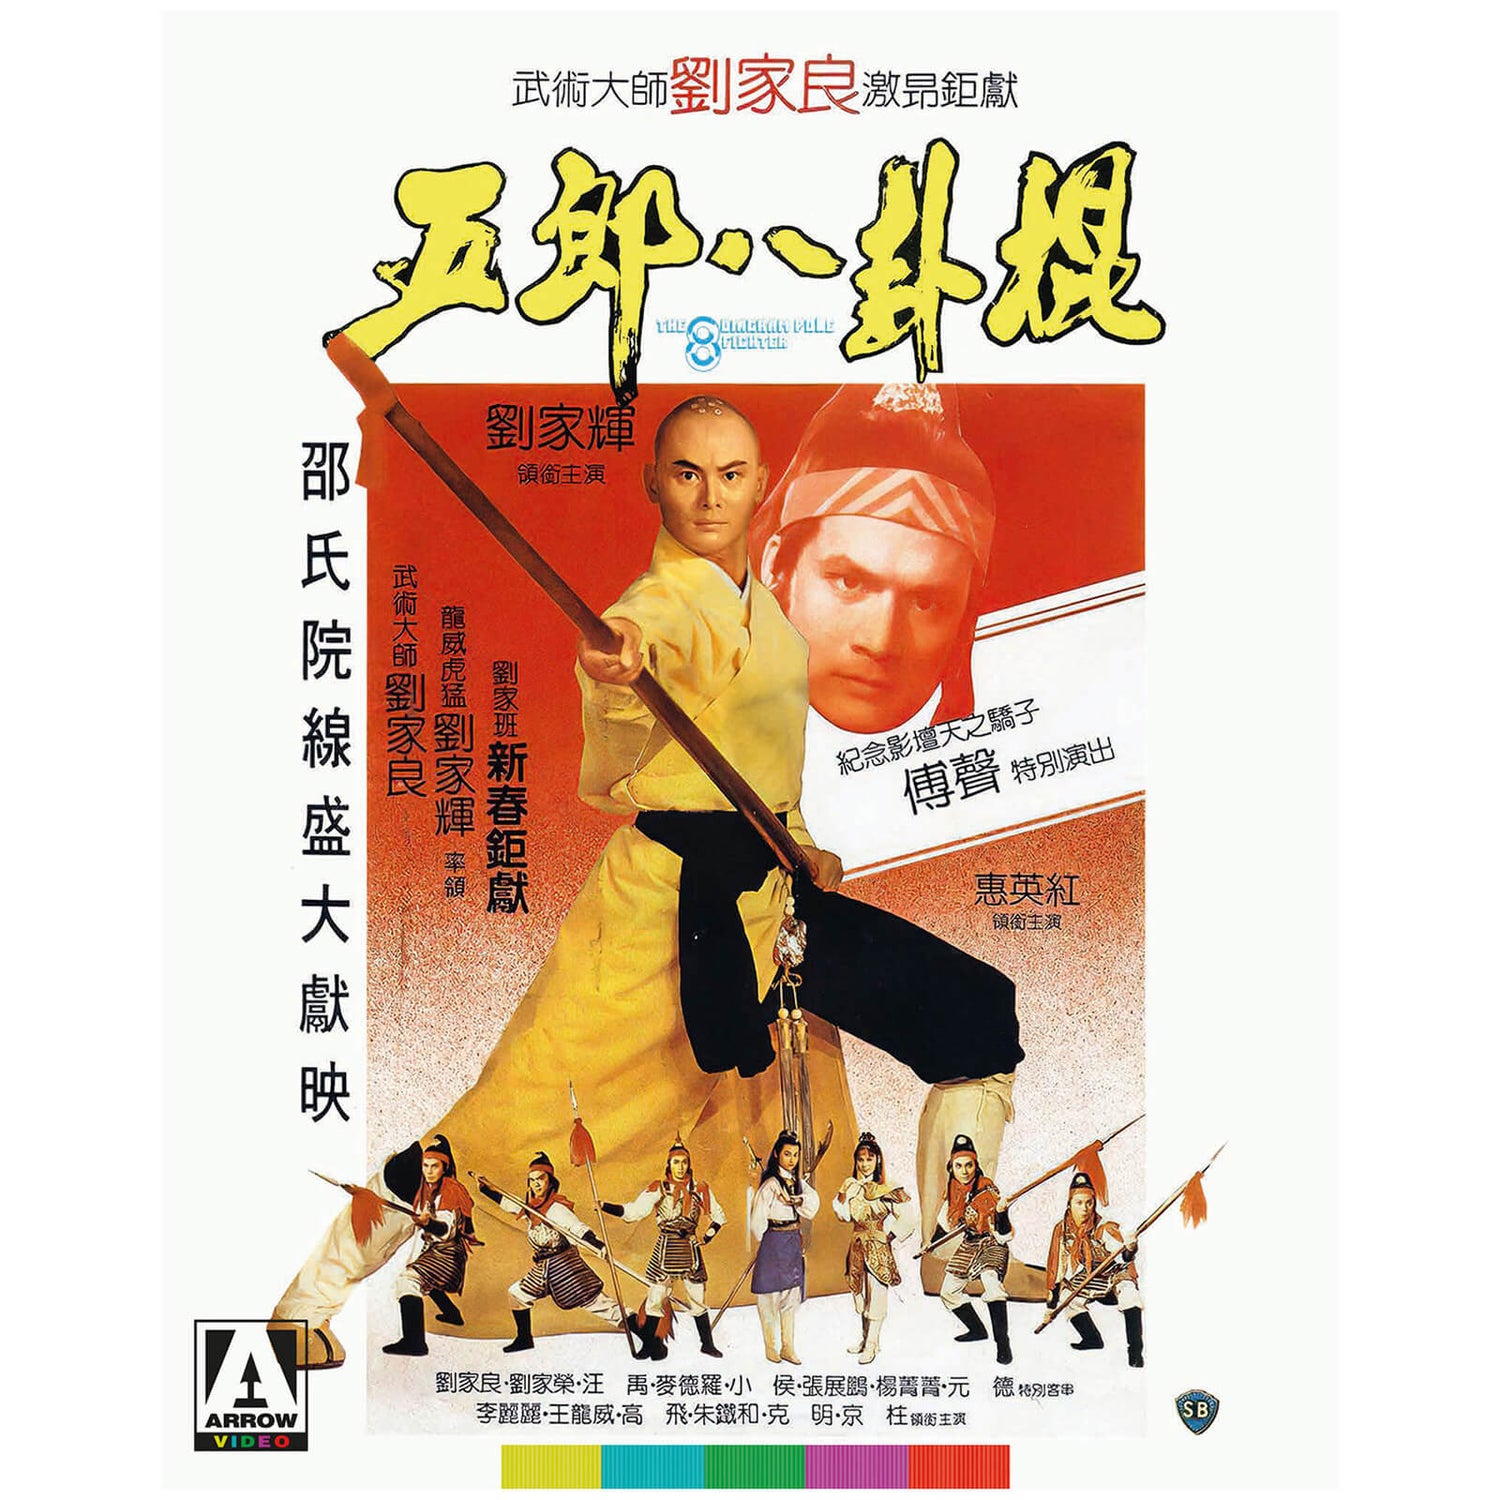 The 8 Diagram Pole Fighter | Original Artwork Slipcover | Limited Edition Blu-ray